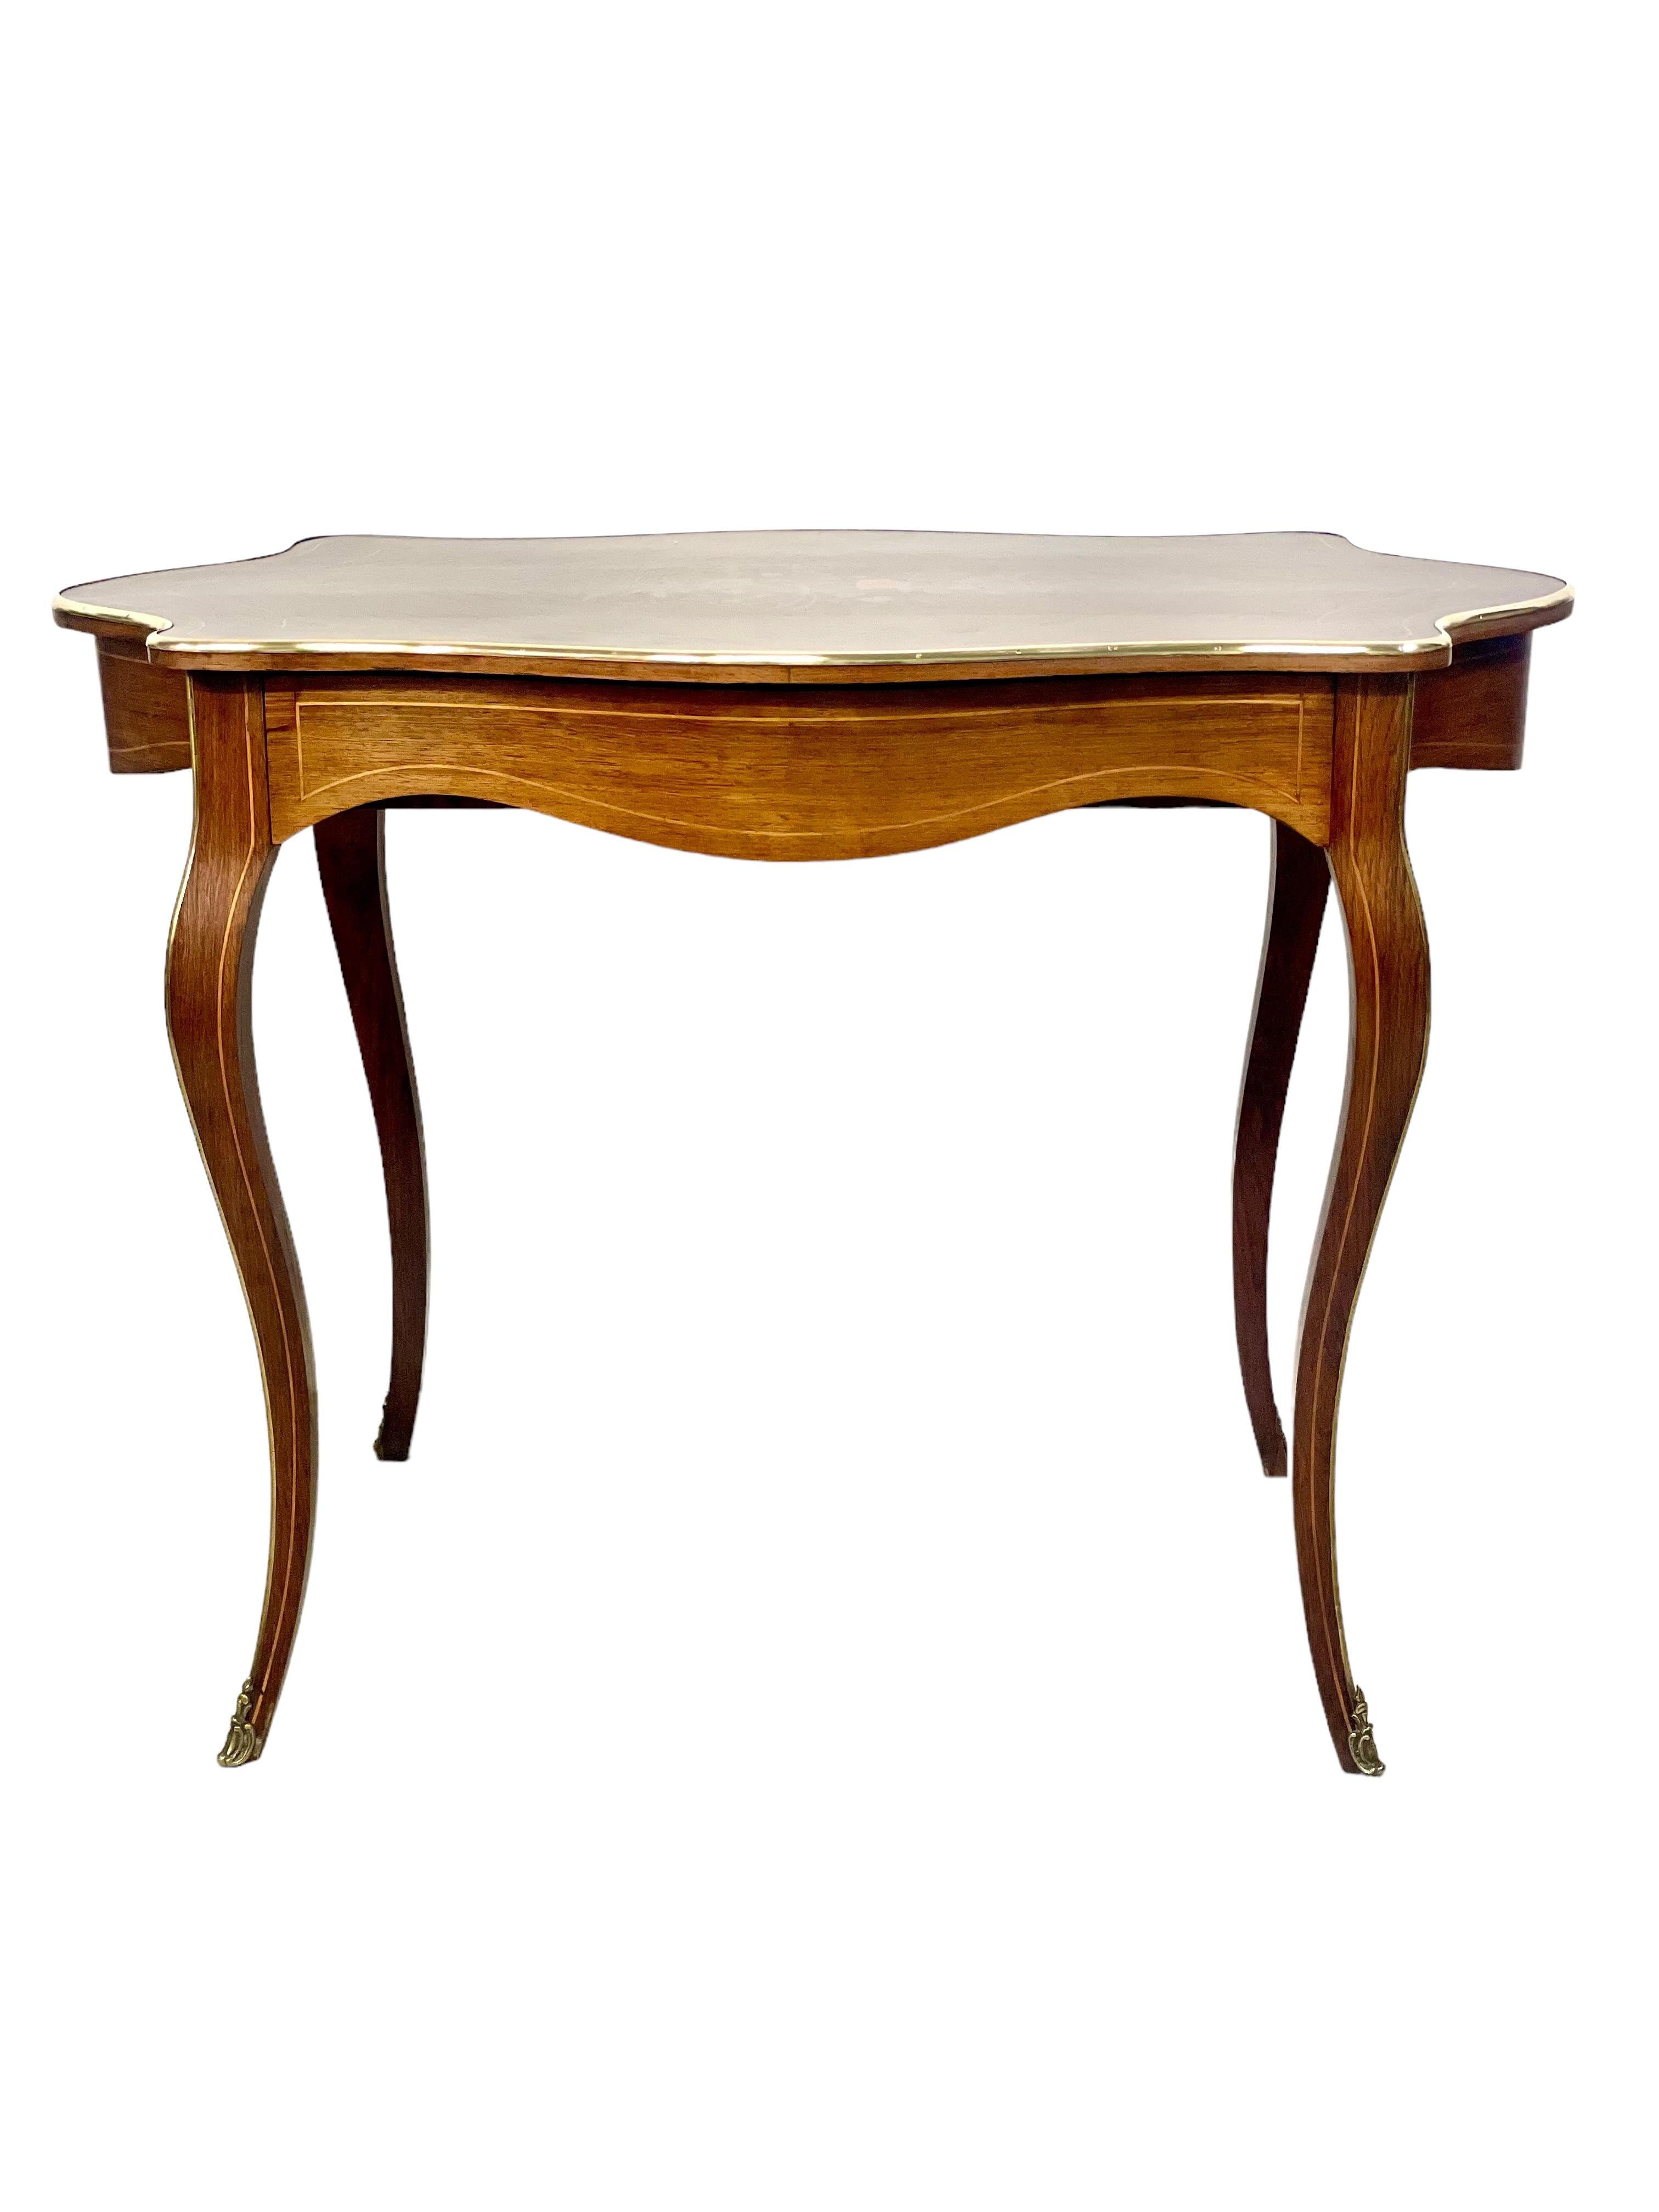 19th Century Louis XV Style Writing Desk or Center Table For Sale 4